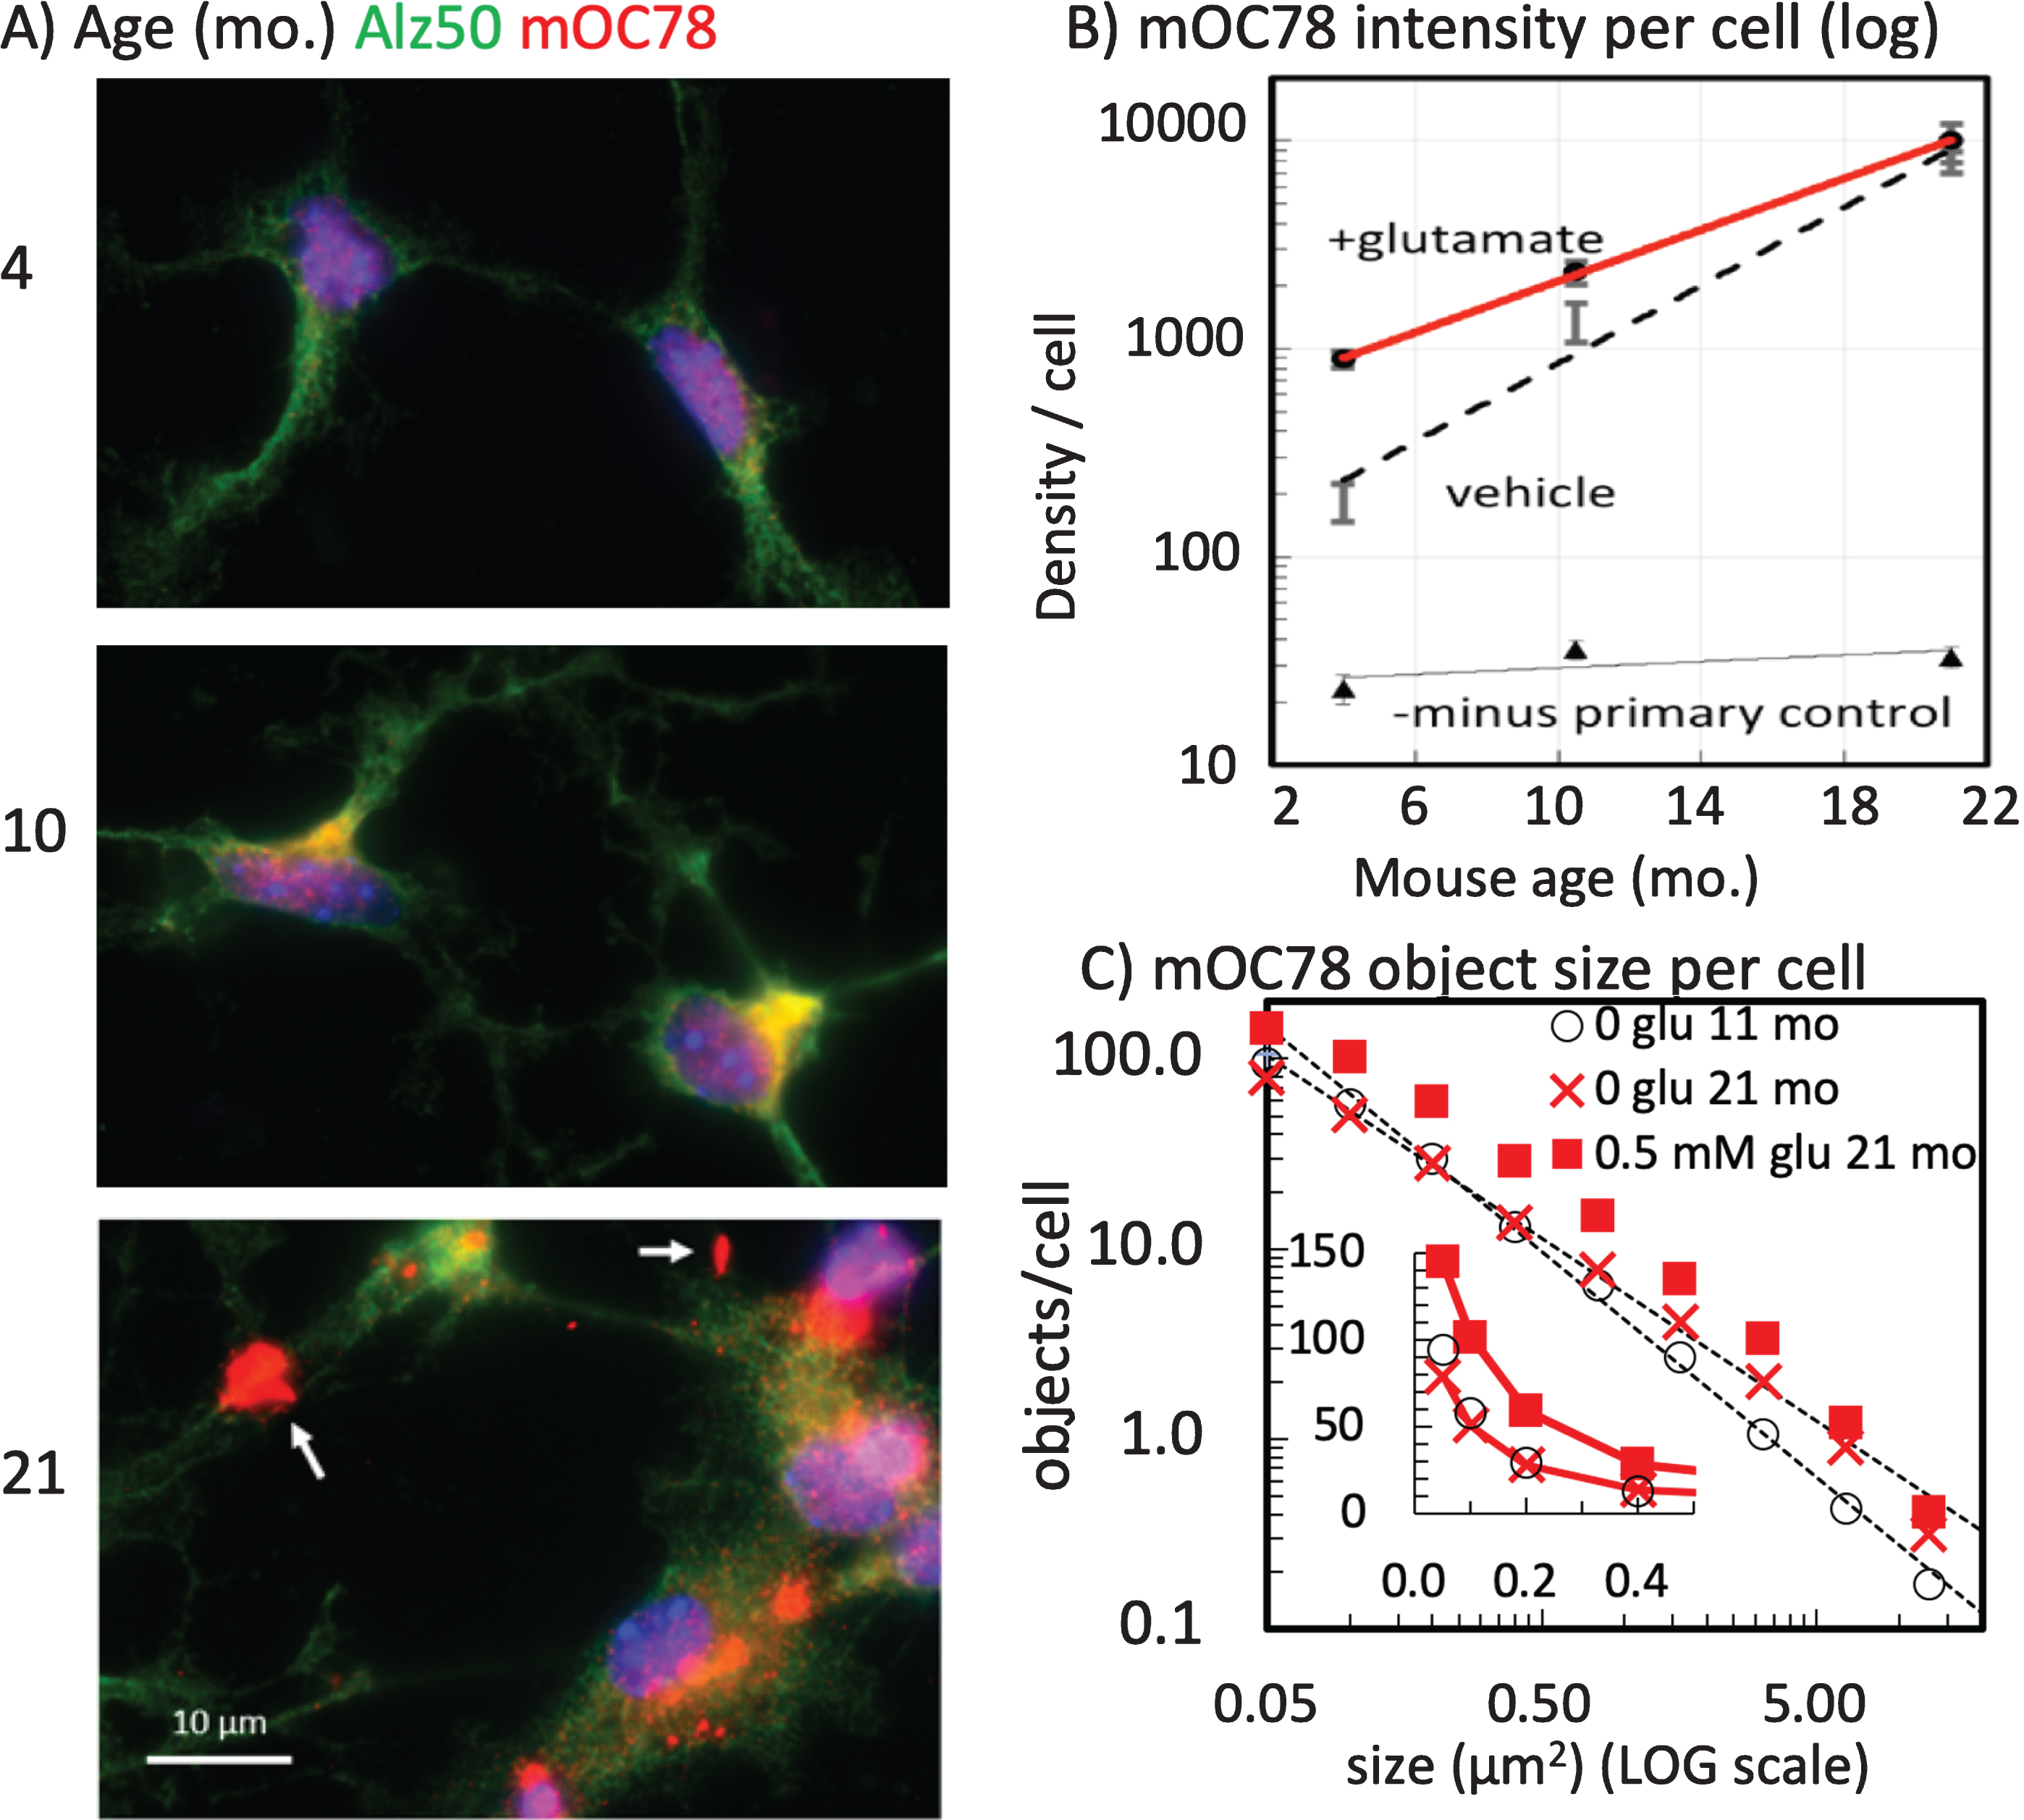 Exponential deposition of intracellular mOC78 Aβ deposits (red) and misfolded tau (Alz-50 tau, green) with age is accelerated by glutamate. A) Neurons stained and imaged in the same batch, at the same exposure and gain. Neurons from the 21-month-old mouse showed large extracellular deposits of mOC78i immunoreactive material (arrows). B) Exponential relationship of mOC78 increase with age. Zero glutamate: y = 98*100.22x; glutamate: y = 511*100.14x. C) Increase in mOC78 object size with age and glutamate. Distributions were fit by least squares over the range of 0.1 to 5μm2: 11-month objects = 0.634*10–1.18 *size, R2 = 0.997, 35 cells, 3306 objects; 21-month objects = 0.772*10–0.959 *size, R2 = 0.998, 48 cells, 4801 objects; 21-month with 0.5 mM glutamate objects = 1.021*10–1.053 *size, R2 = 0.994, 51 cells, 4807 objects. Inset shows small sizes on a linear scale with large effect of glutamate. Neurons were from female mice of indicated ages. File 170726. Density changes with age confirmed in male as exponential, file 180329.